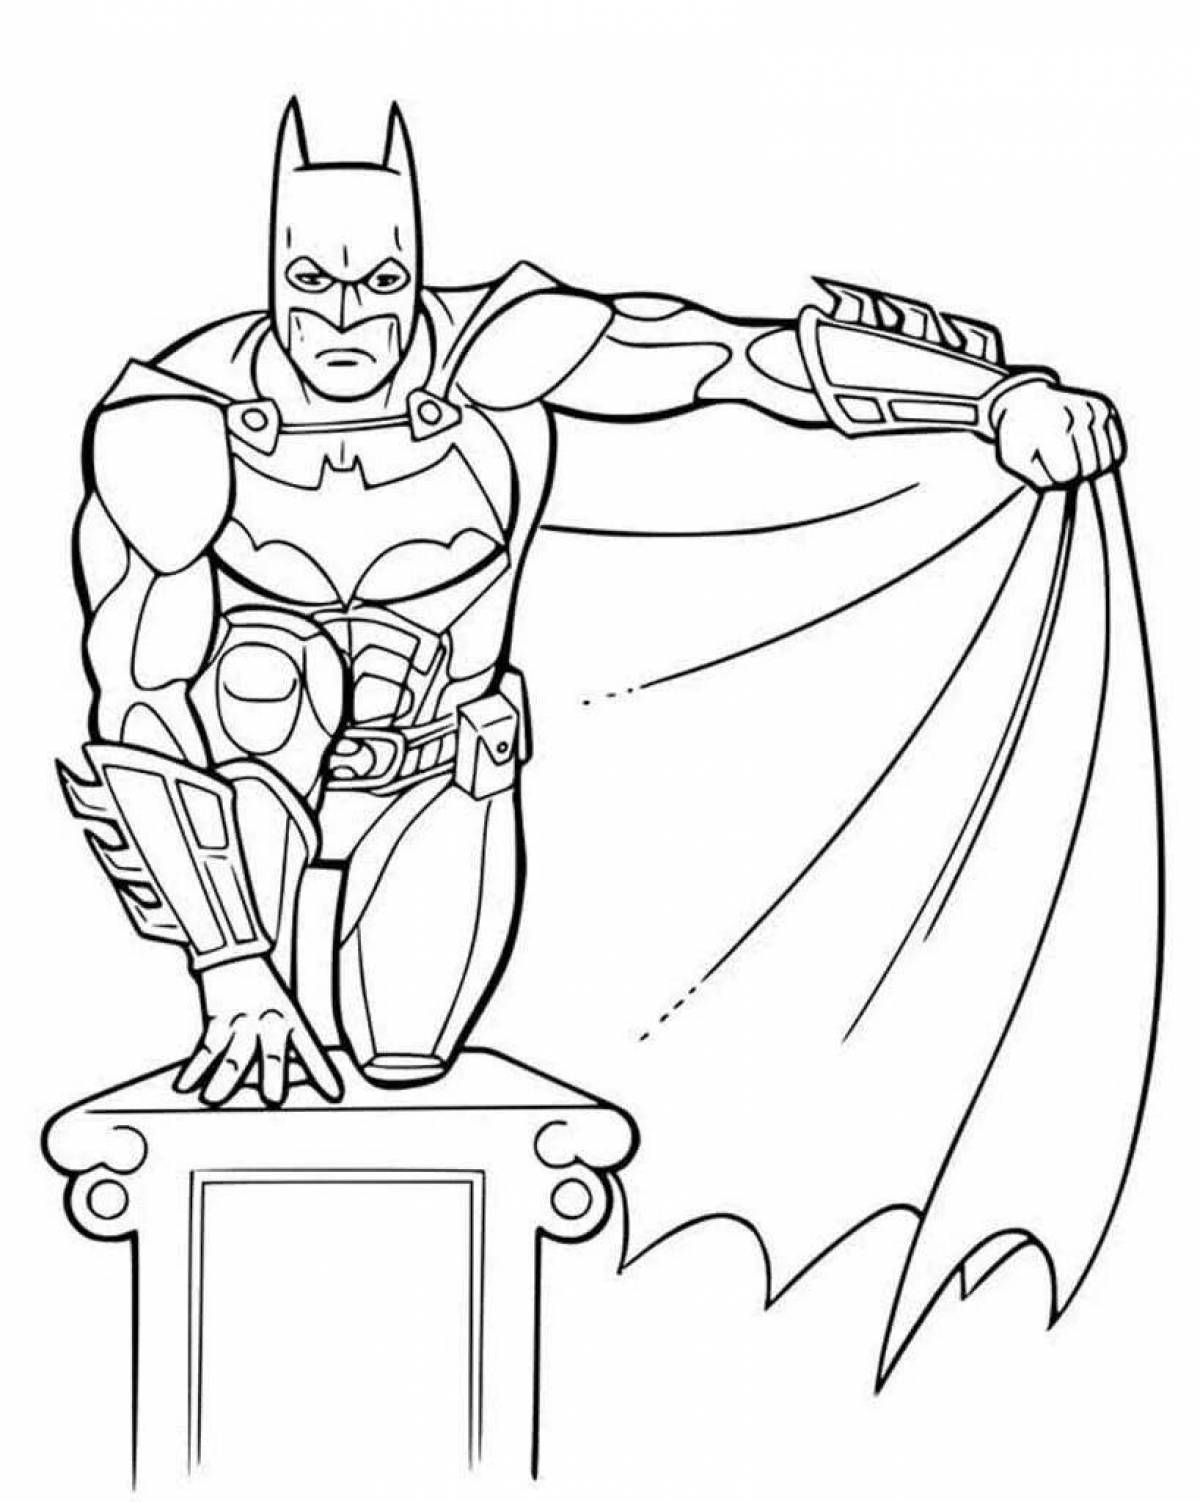 Gorgeous superheroes coloring pages for 5-6 year olds